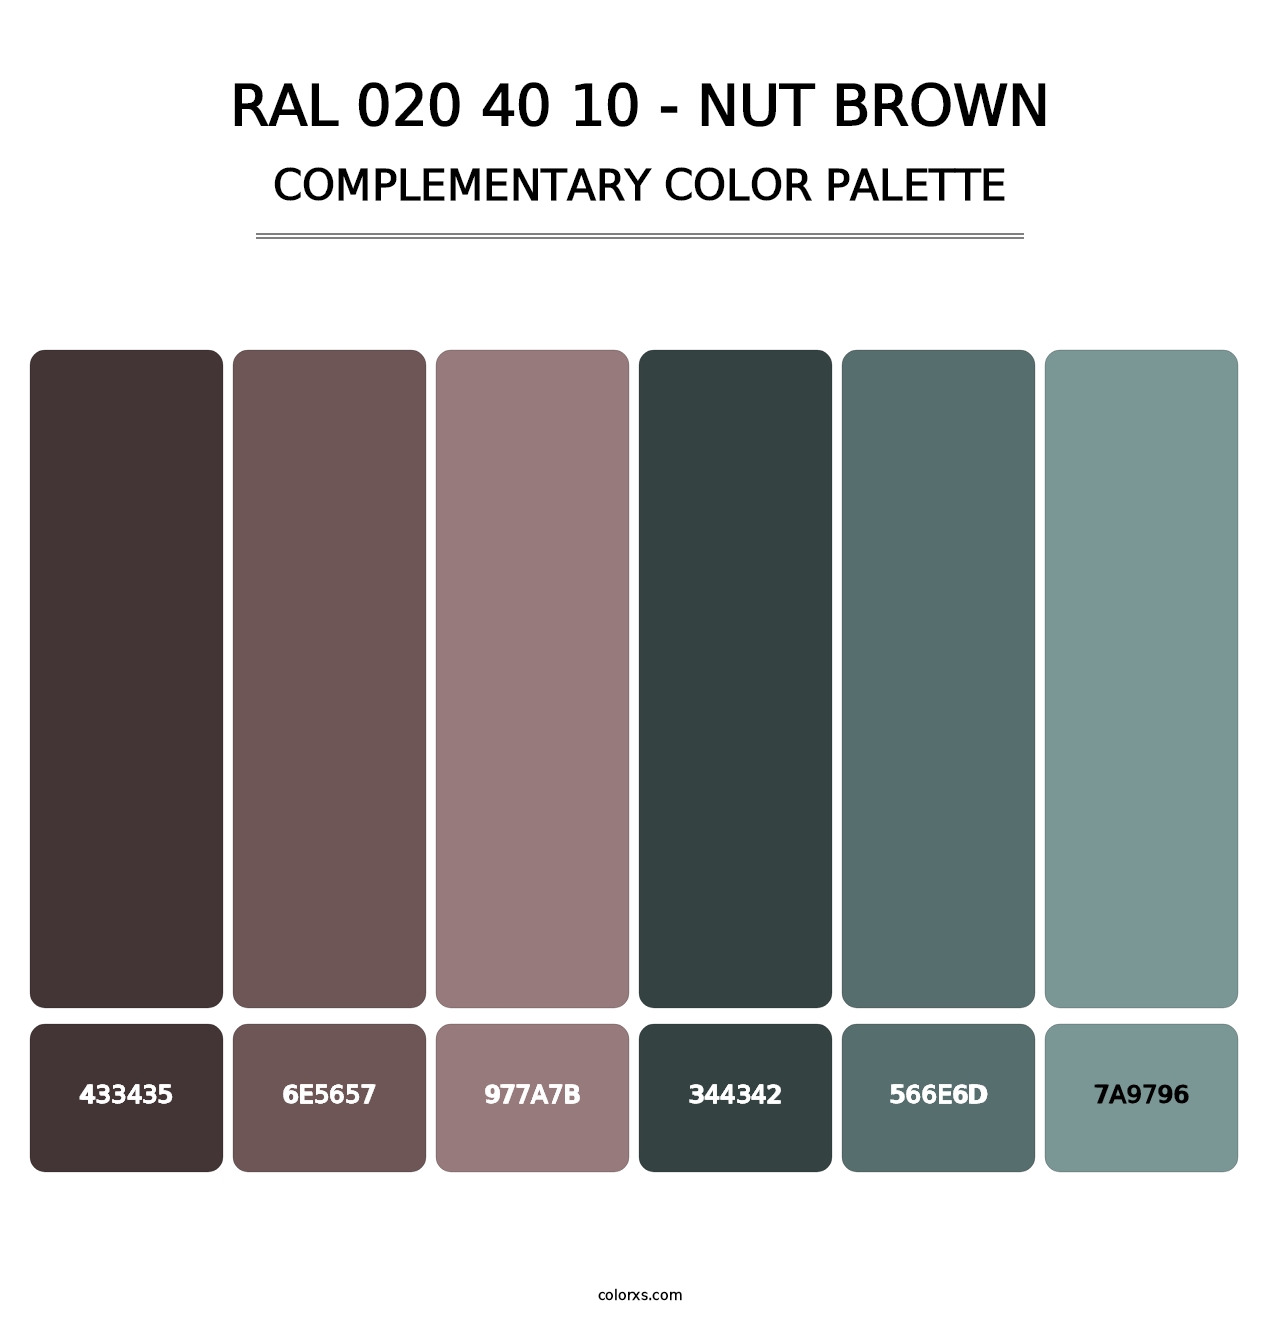 RAL 020 40 10 - Nut Brown - Complementary Color Palette